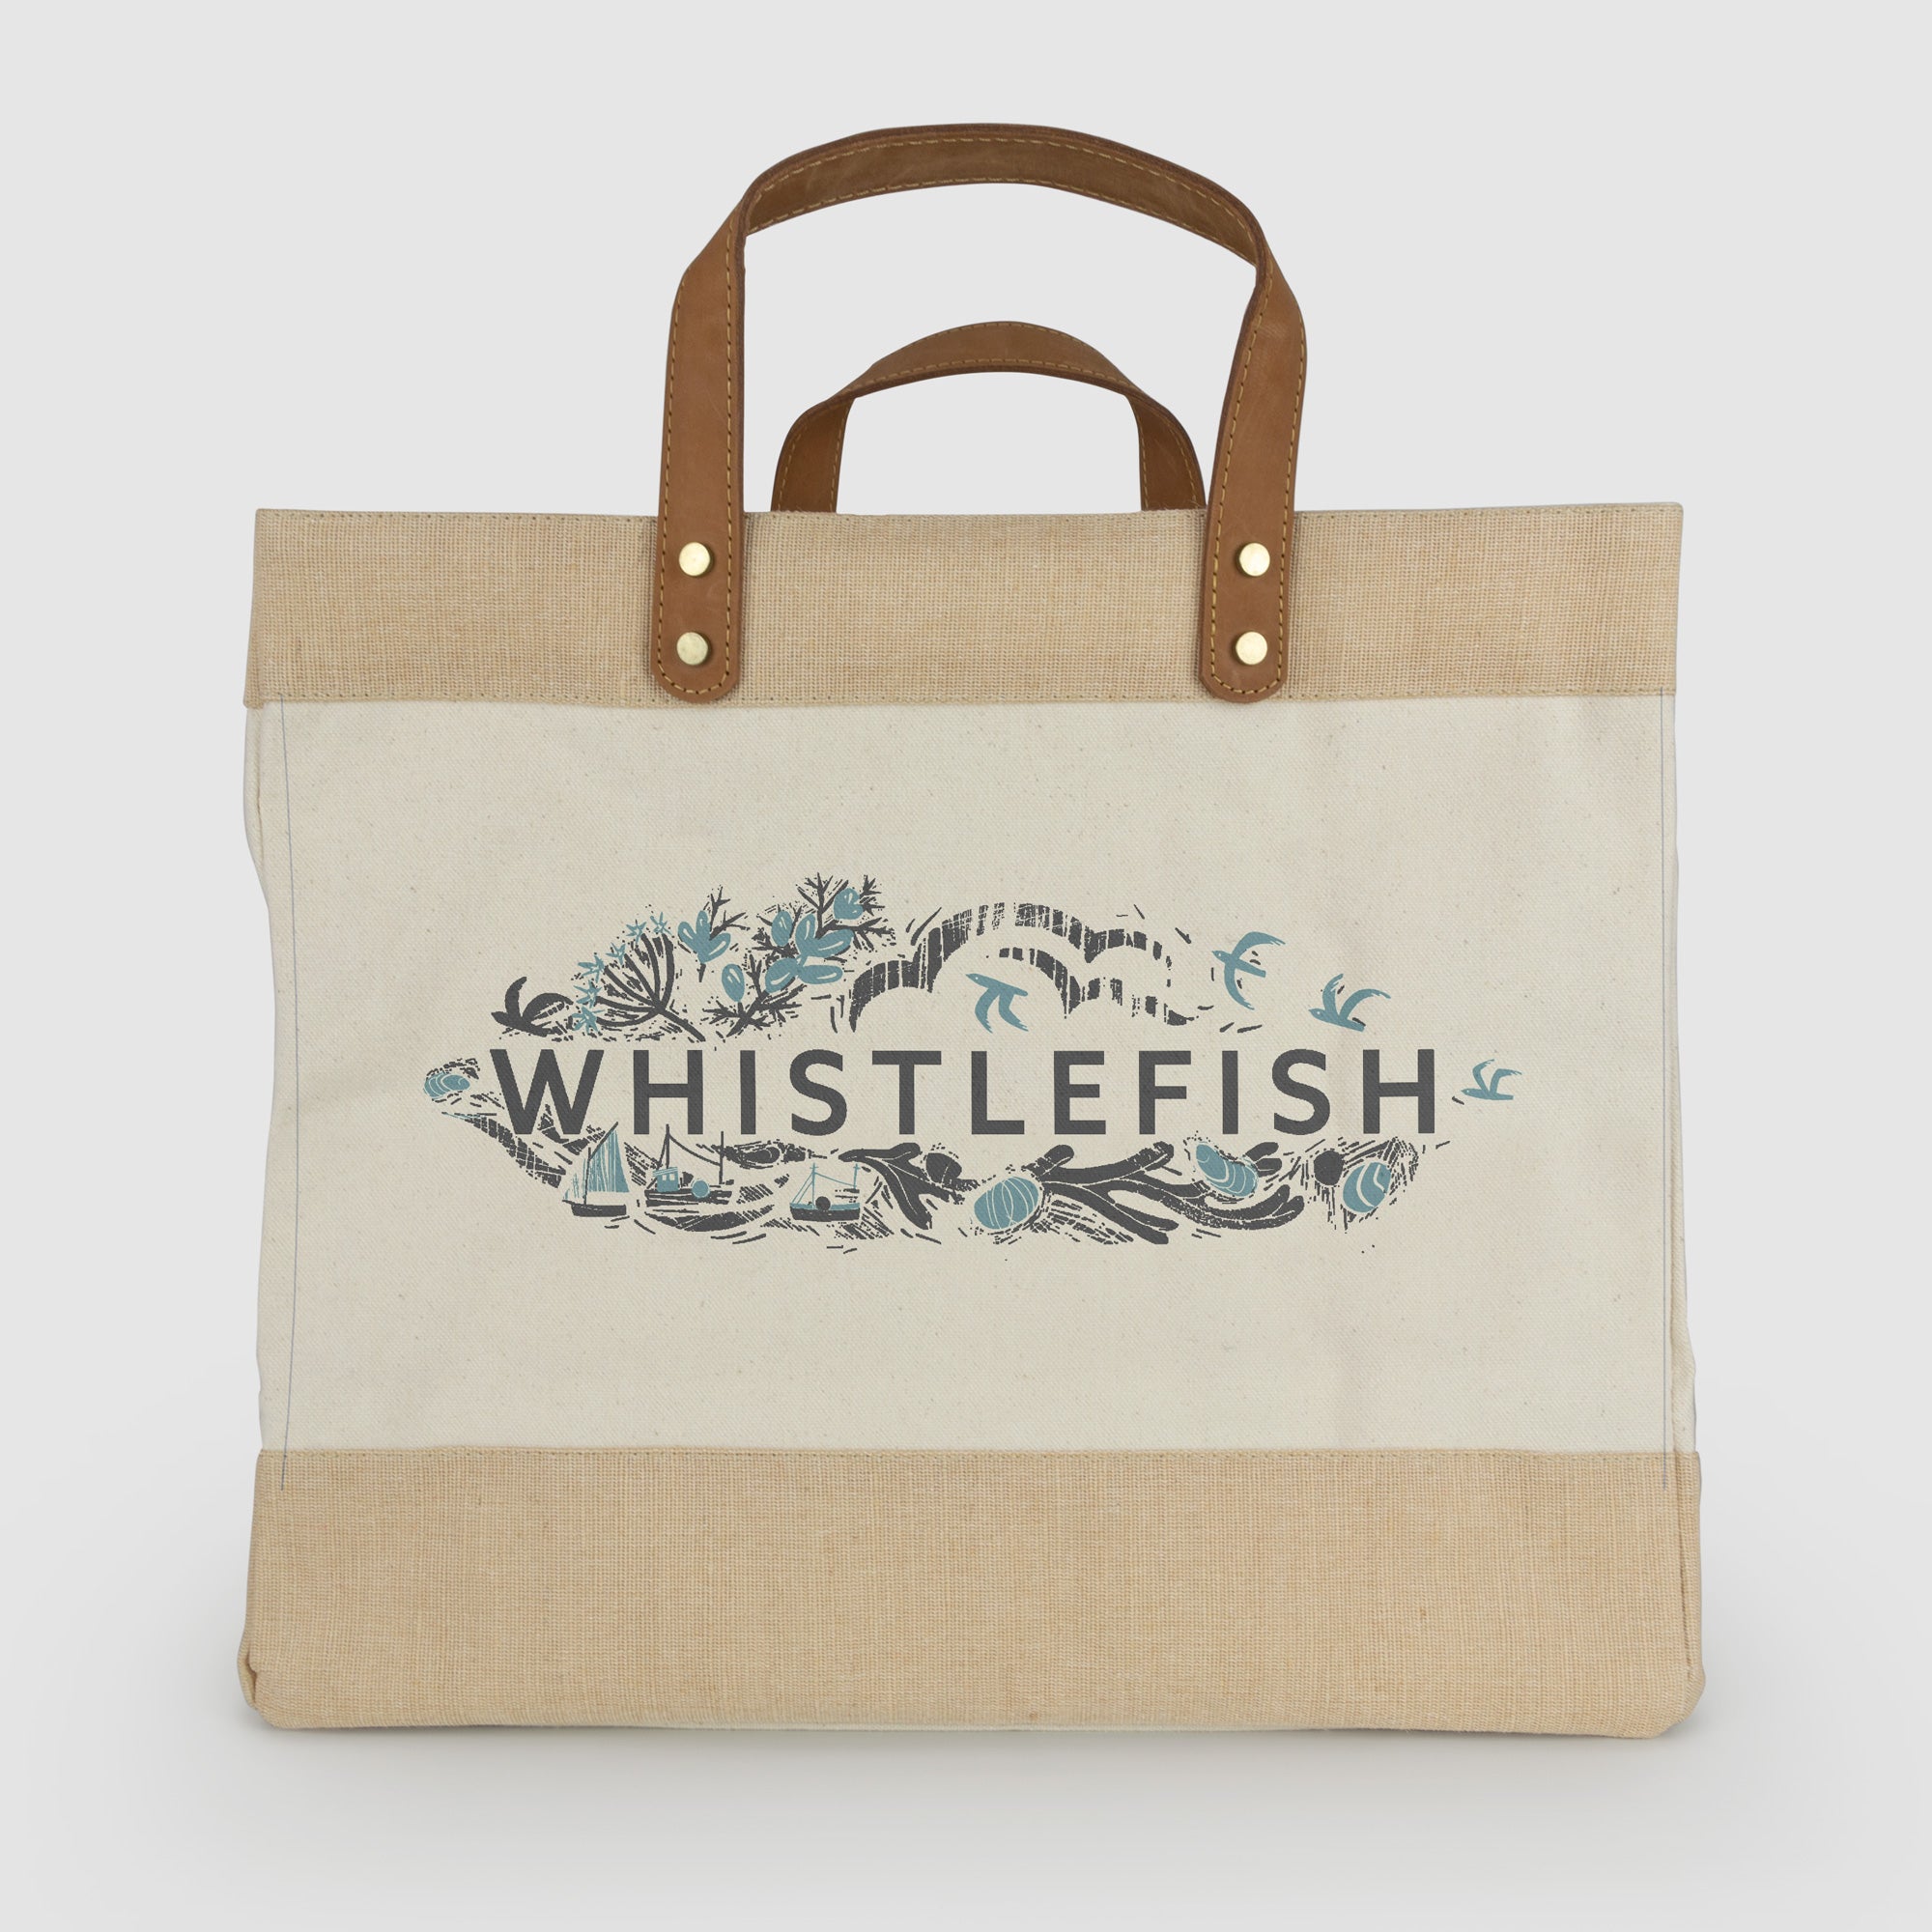 The Luxury Jute Bag by Whistlefish